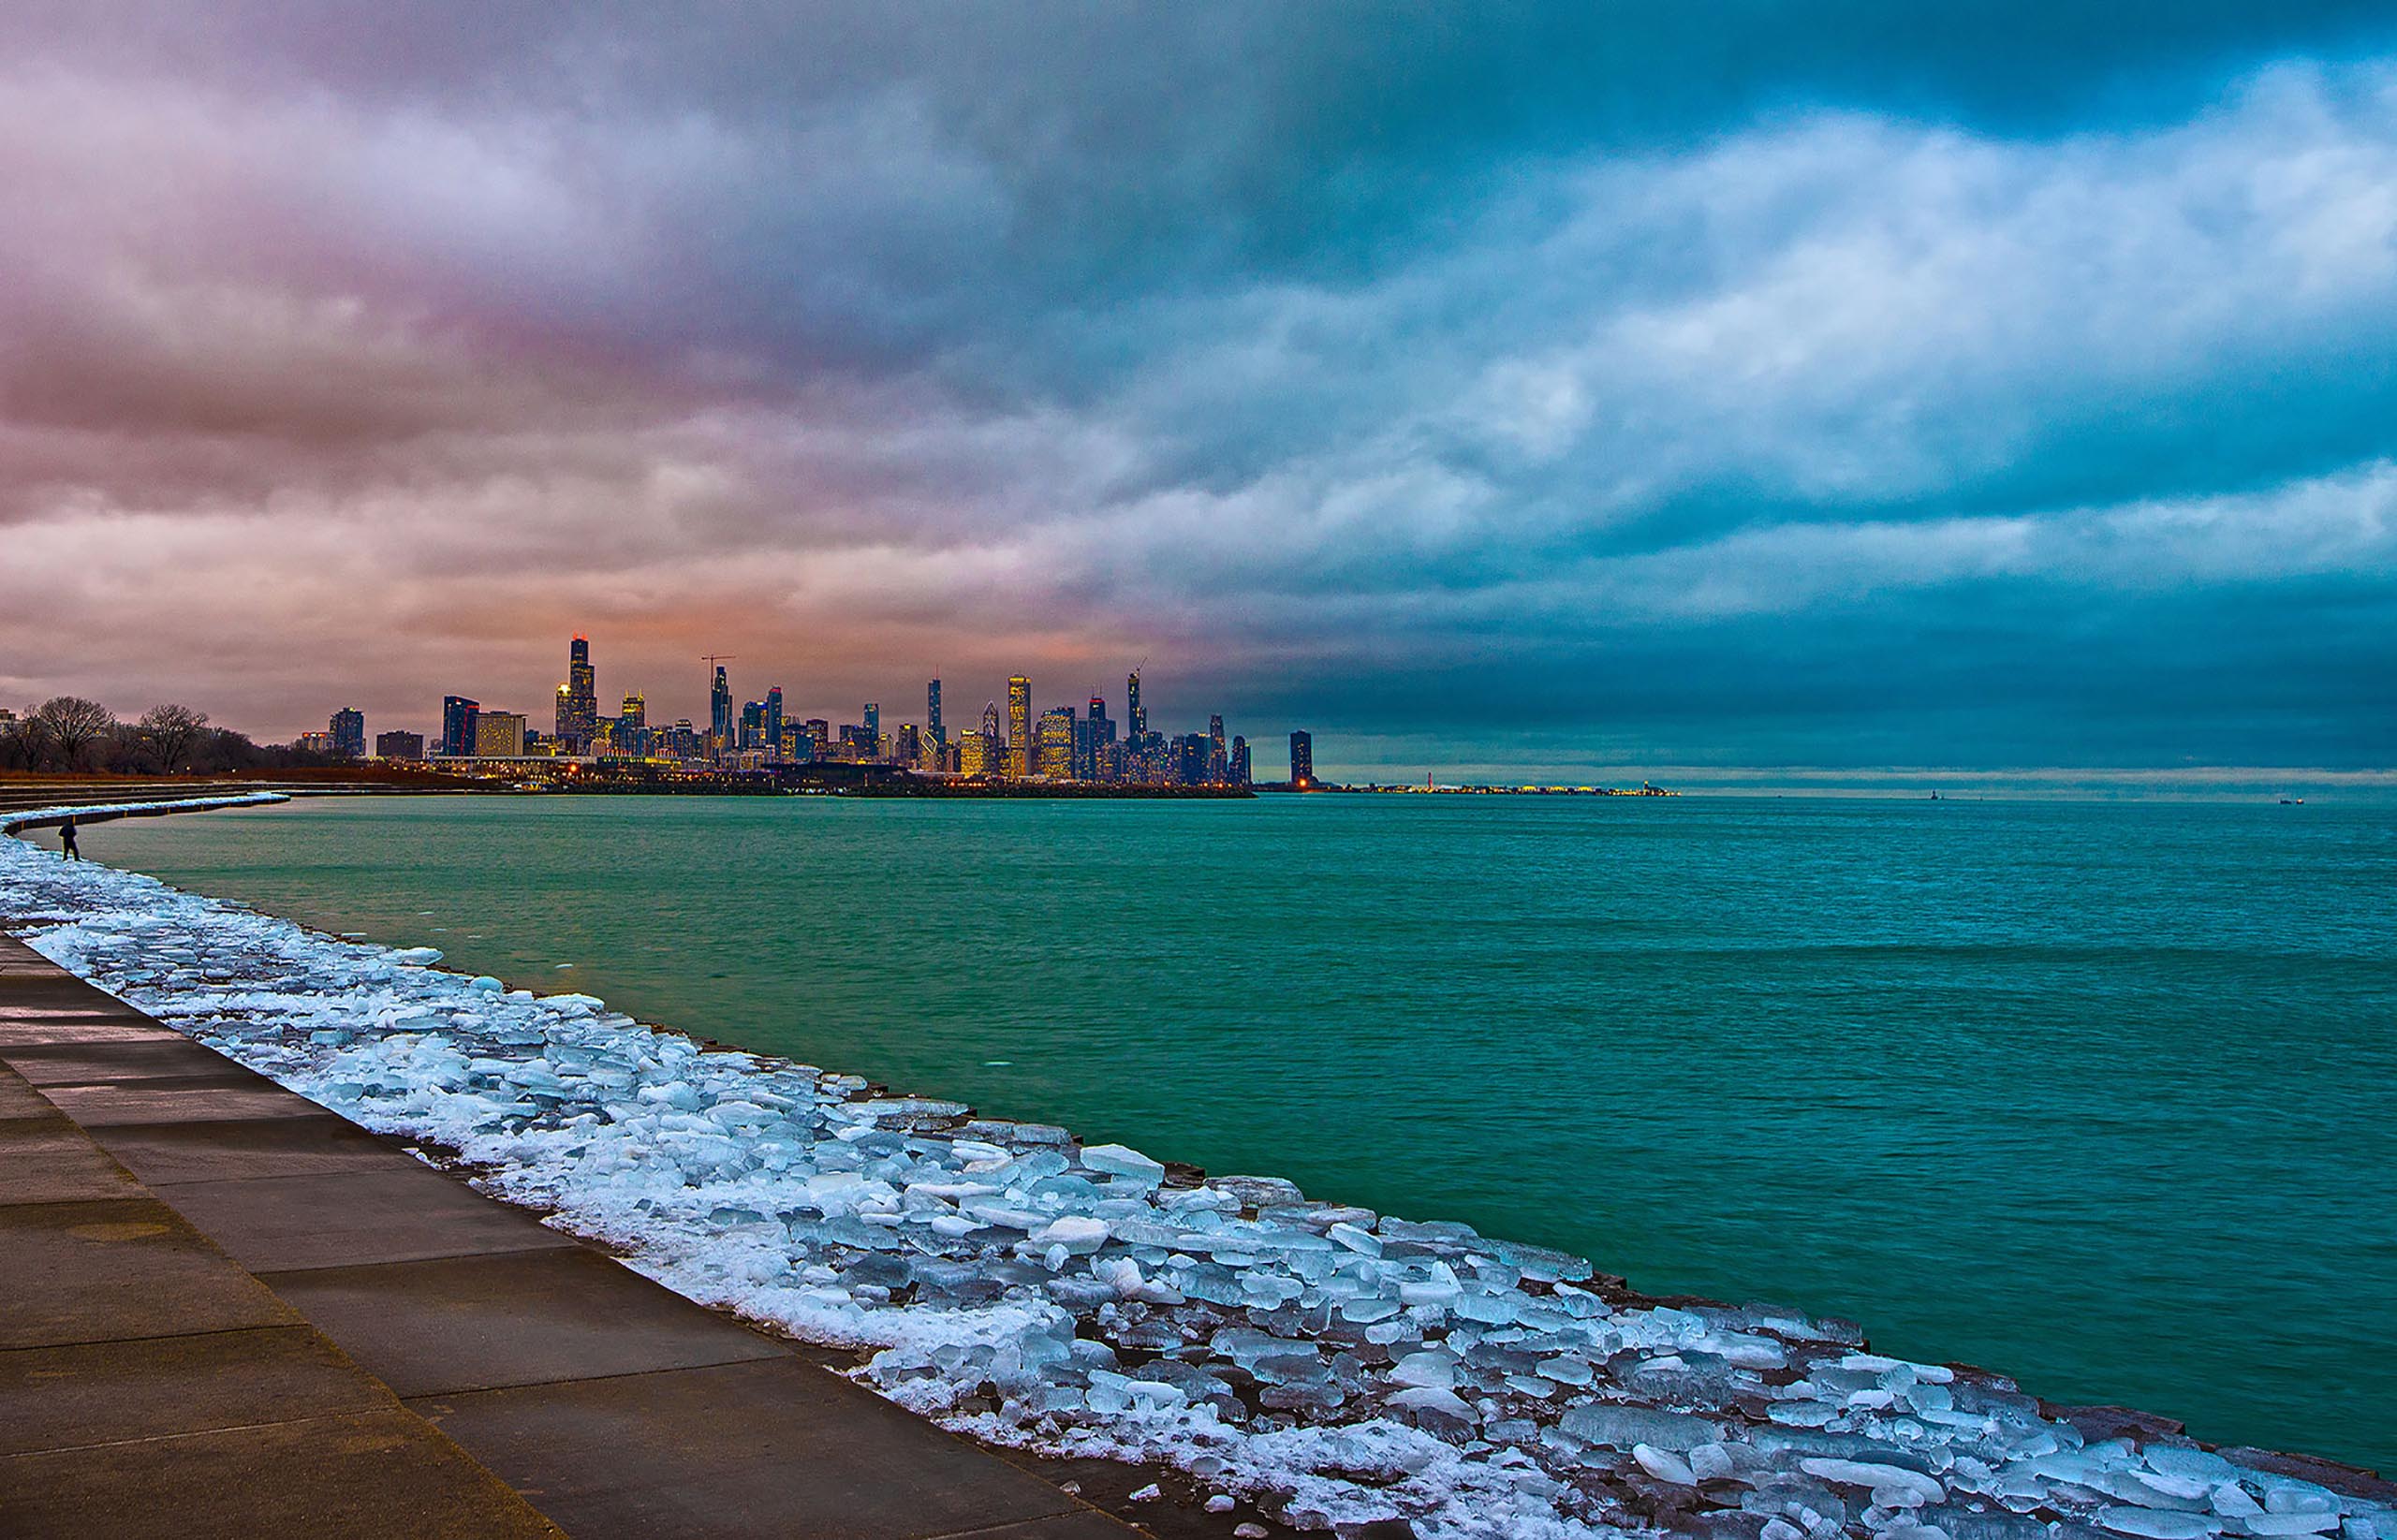 The coldest temperature in Chicago in 34 years (-23°) was recorded on the morning of January 30, 2019 during a bitter cold couple of days.